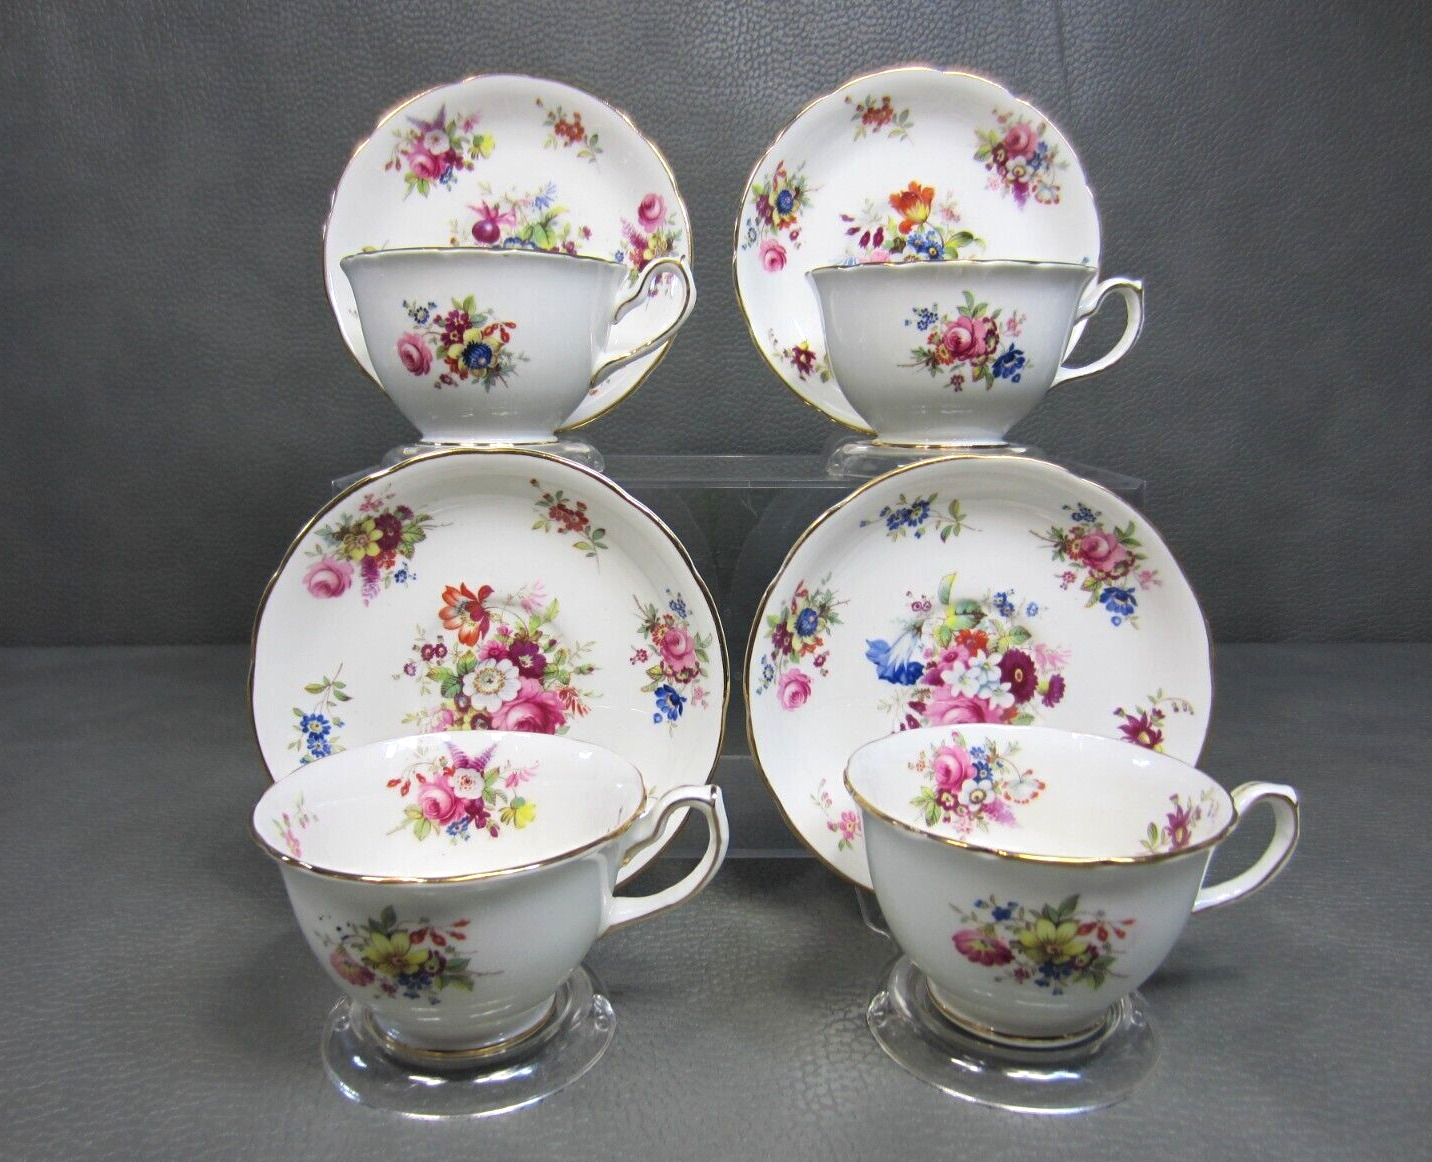 Vintage Set of 4 Hammersley & Co. England Bone China Floral Cup and Saucer #2991